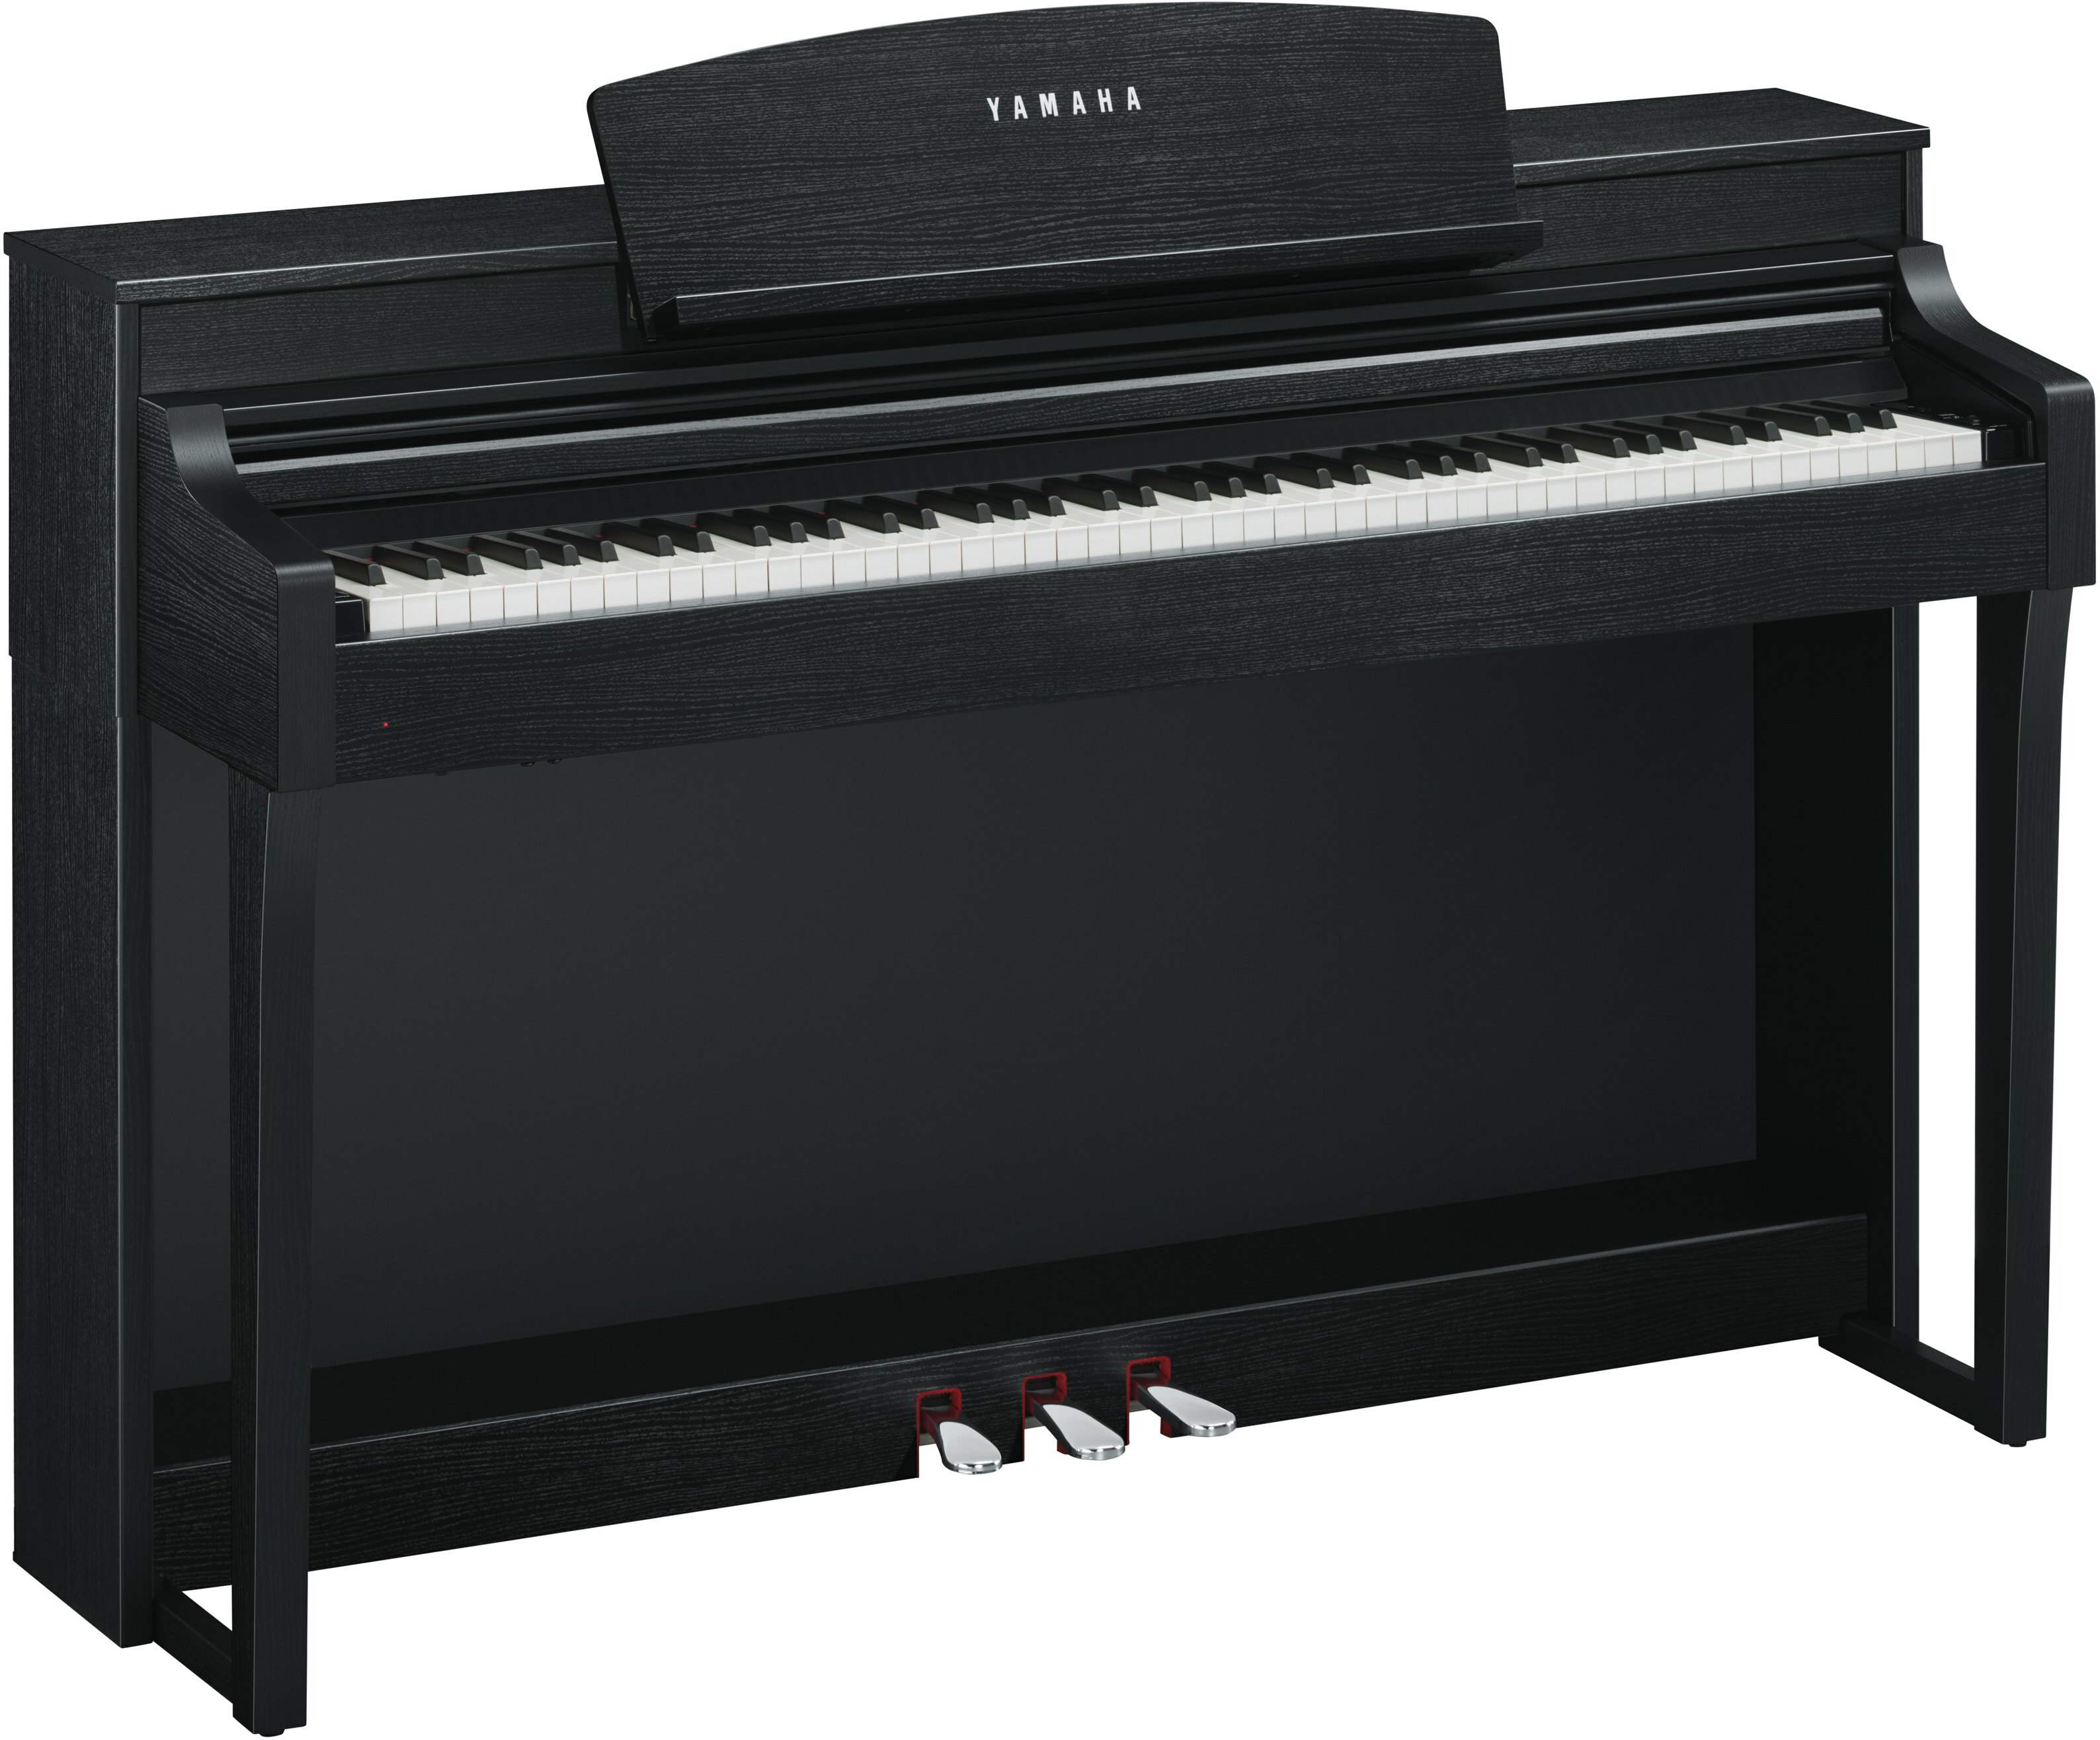 Yamaha Csp-150 - Black - Digital piano with stand - Main picture